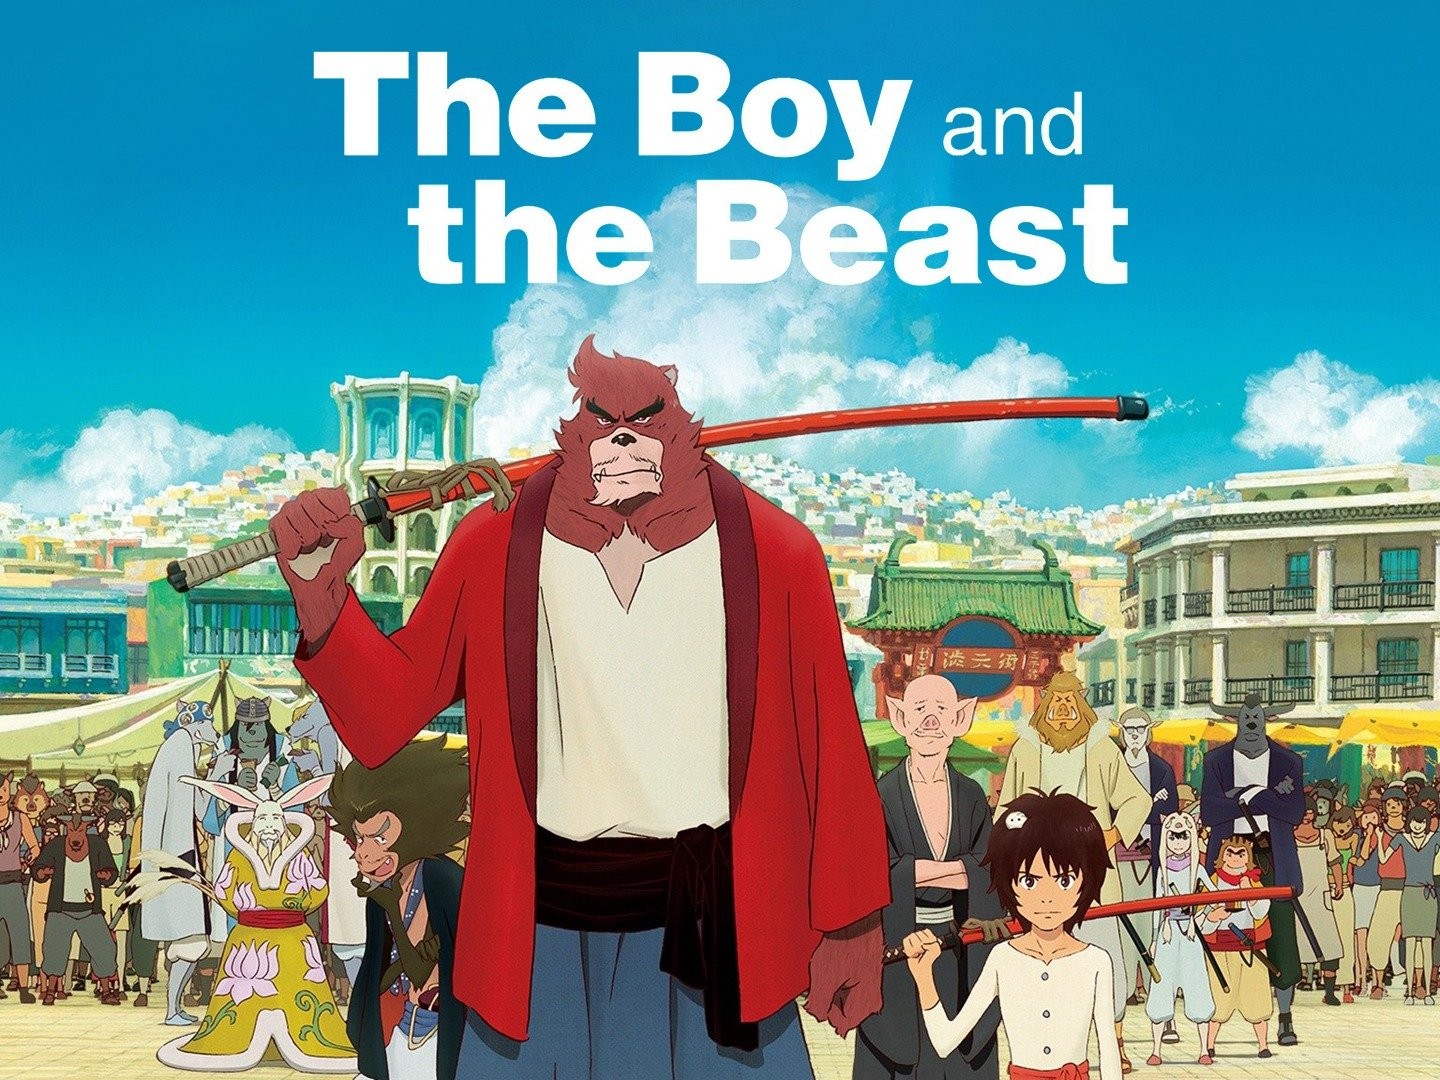 The Boy and the Beast